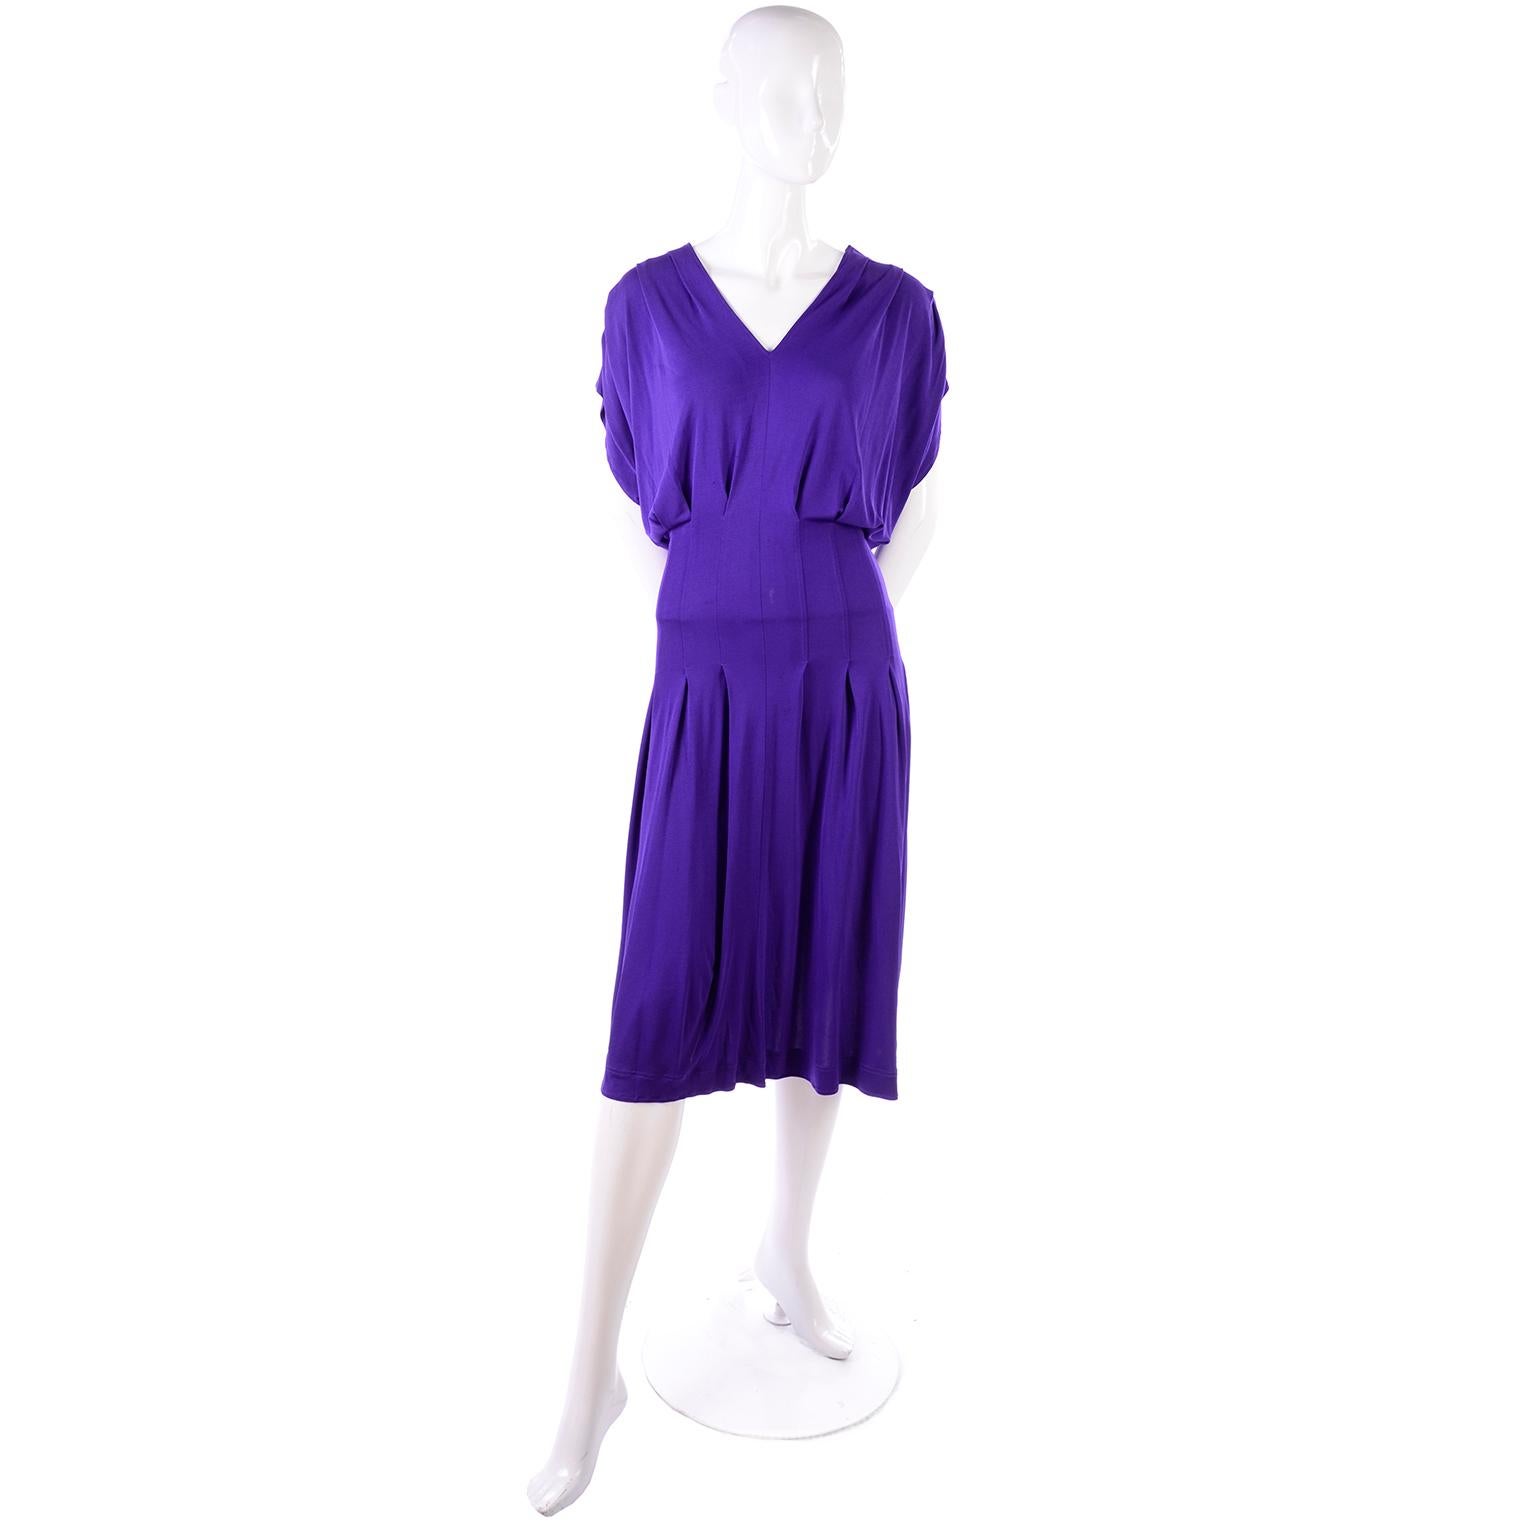 This is a great late 1970's or early 1980's vintage dress from Jean Muir, London. The dress is in a purple rayon jersey and has gathered dolman style short sleeves and a V neck.  The dress is marked as an 8, but because of the loose fit, it can fit